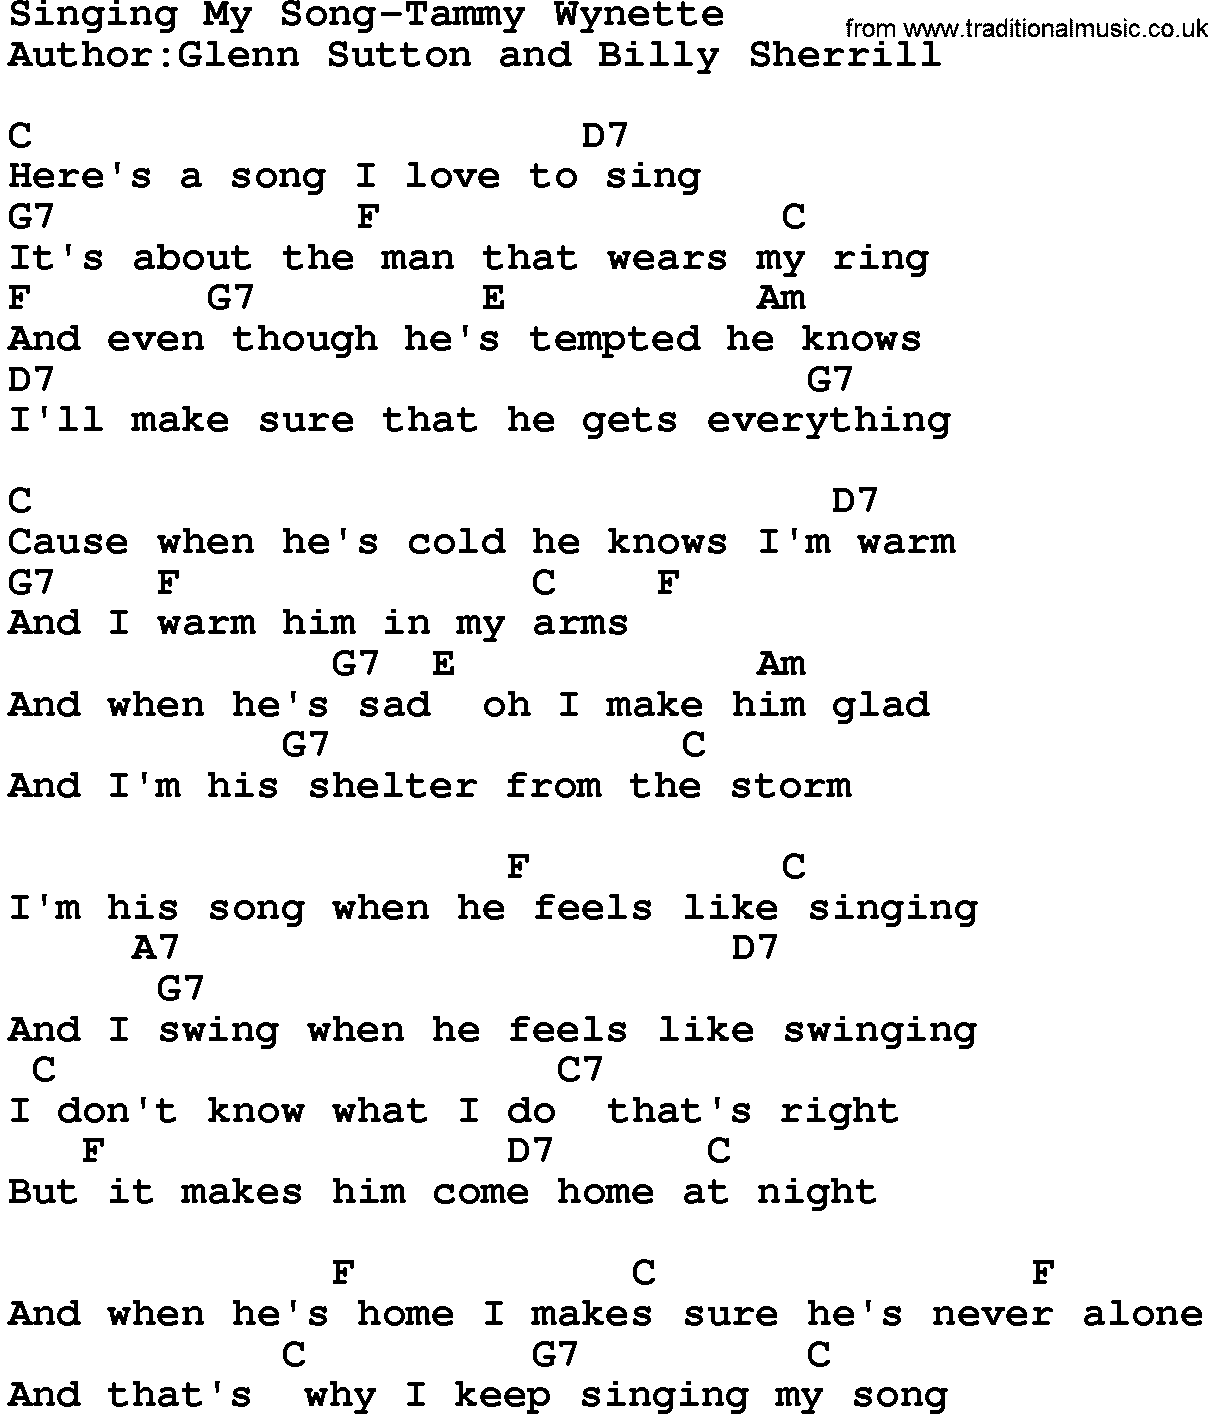 Country music song: Singing My Song-Tammy Wynette lyrics and chords